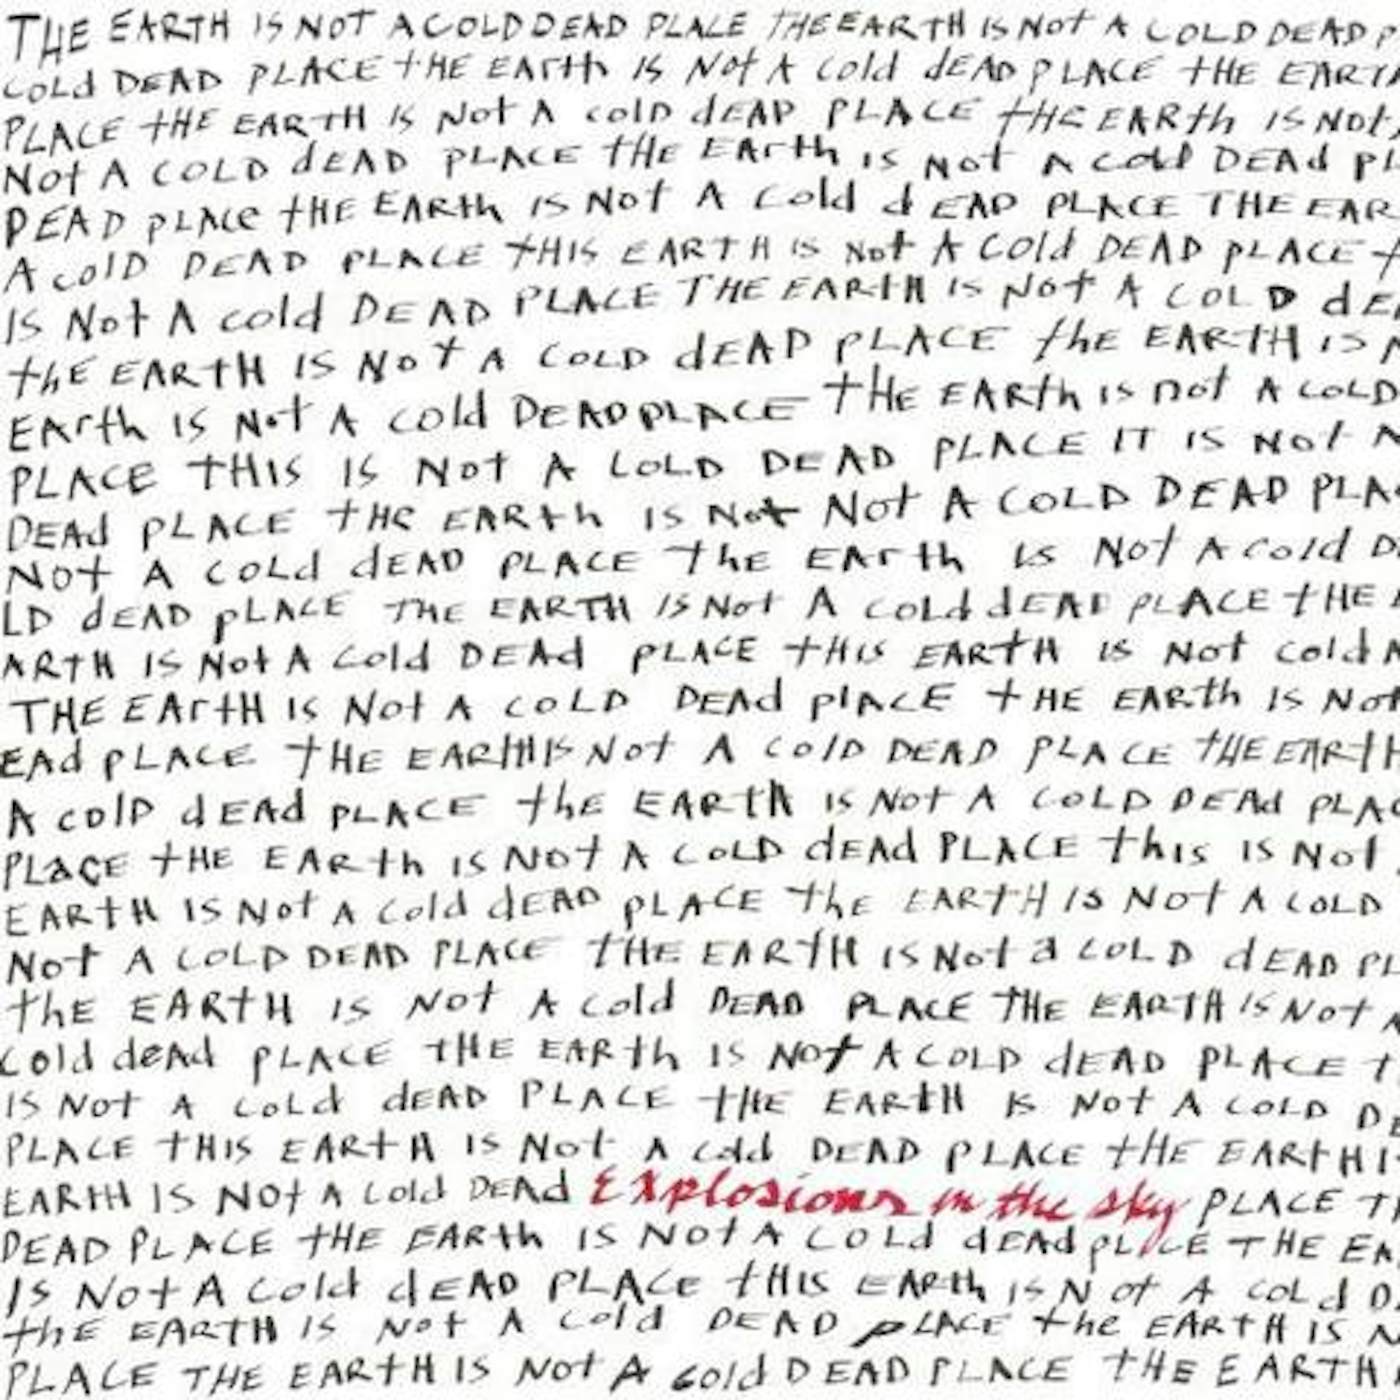 Explosions In The Sky EARTH IS NOT A COLD DEAD PLACE Vinyl Record